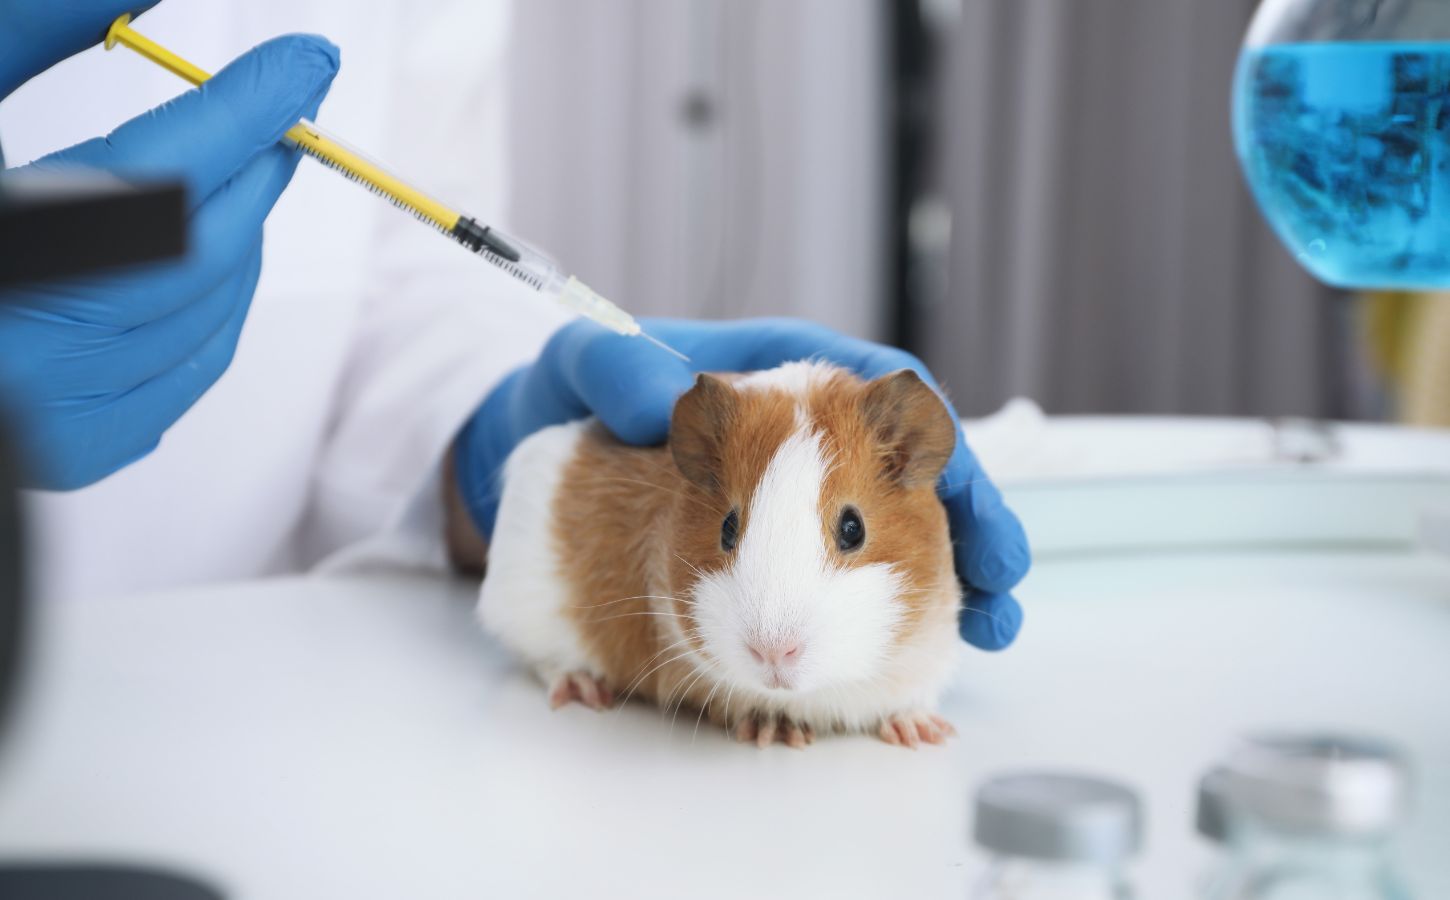 A guinea pig being experimented on as part of animal tests